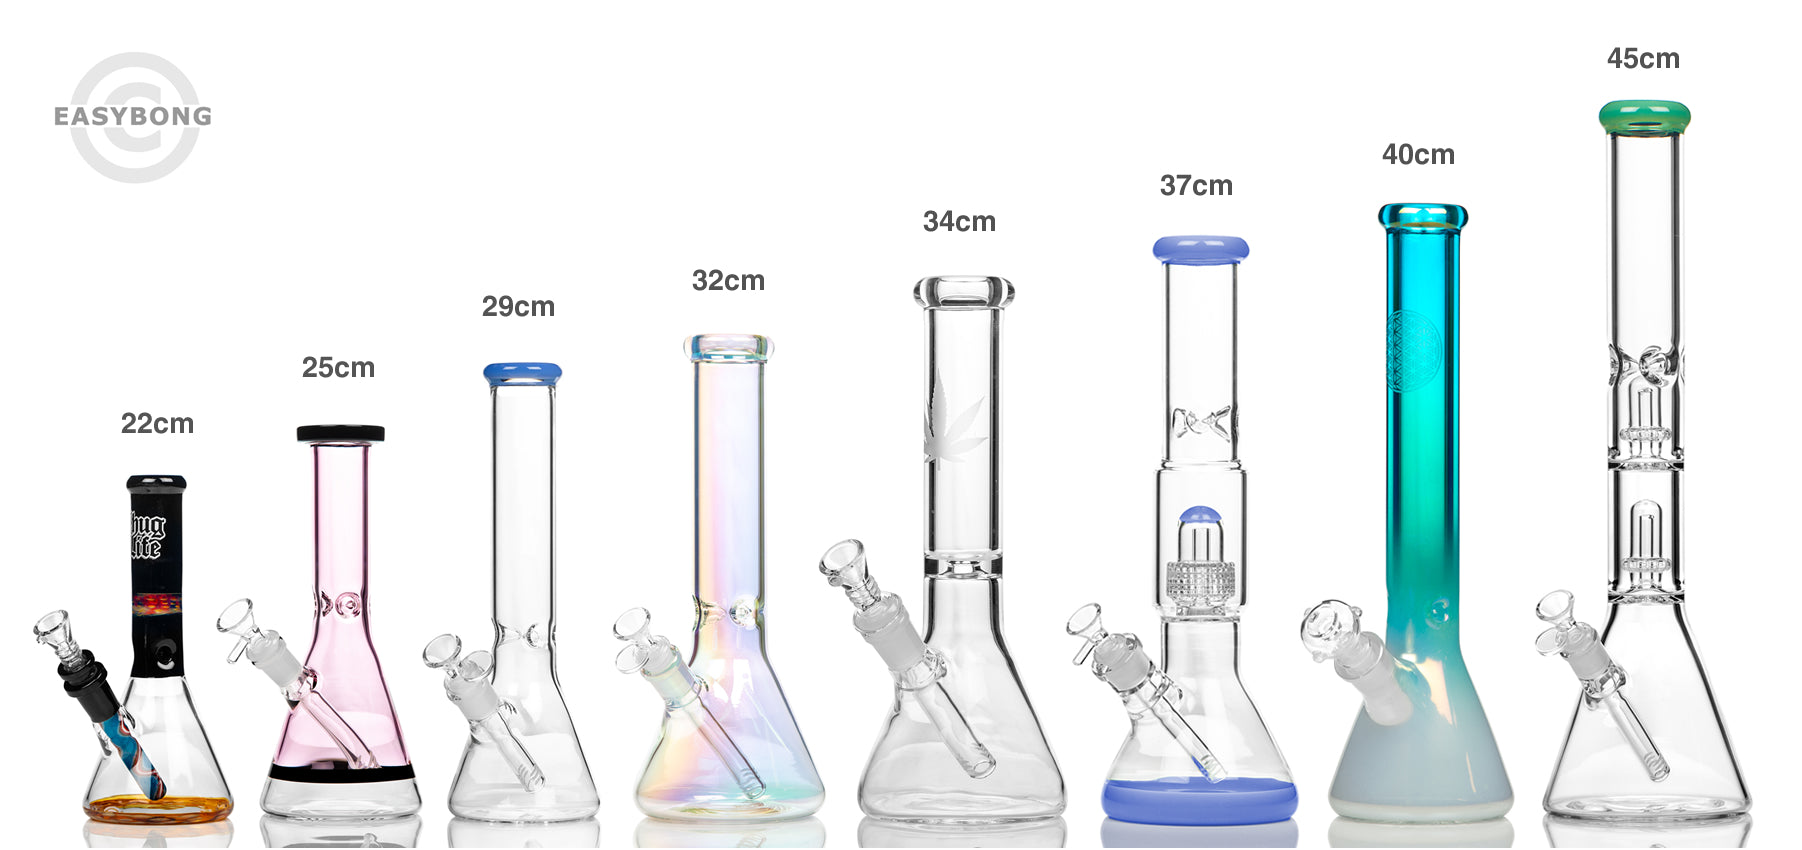 Size comparison of glass beaker bongs from small to large.